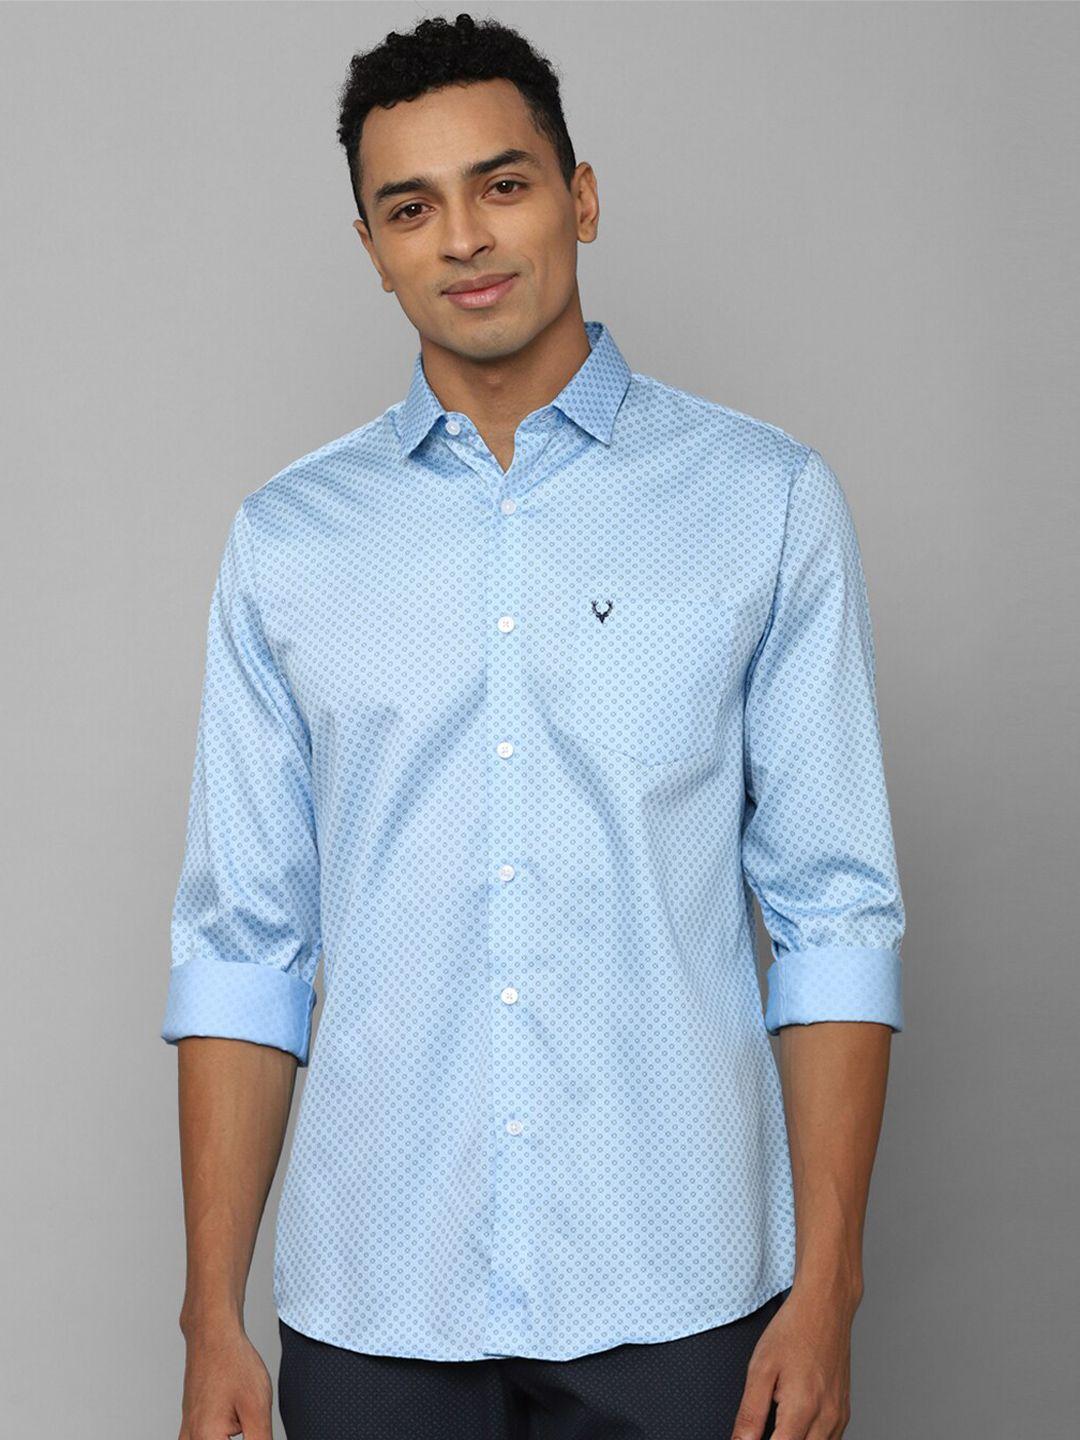 allen solly slim fit geometric printed pure cotton casual shirt